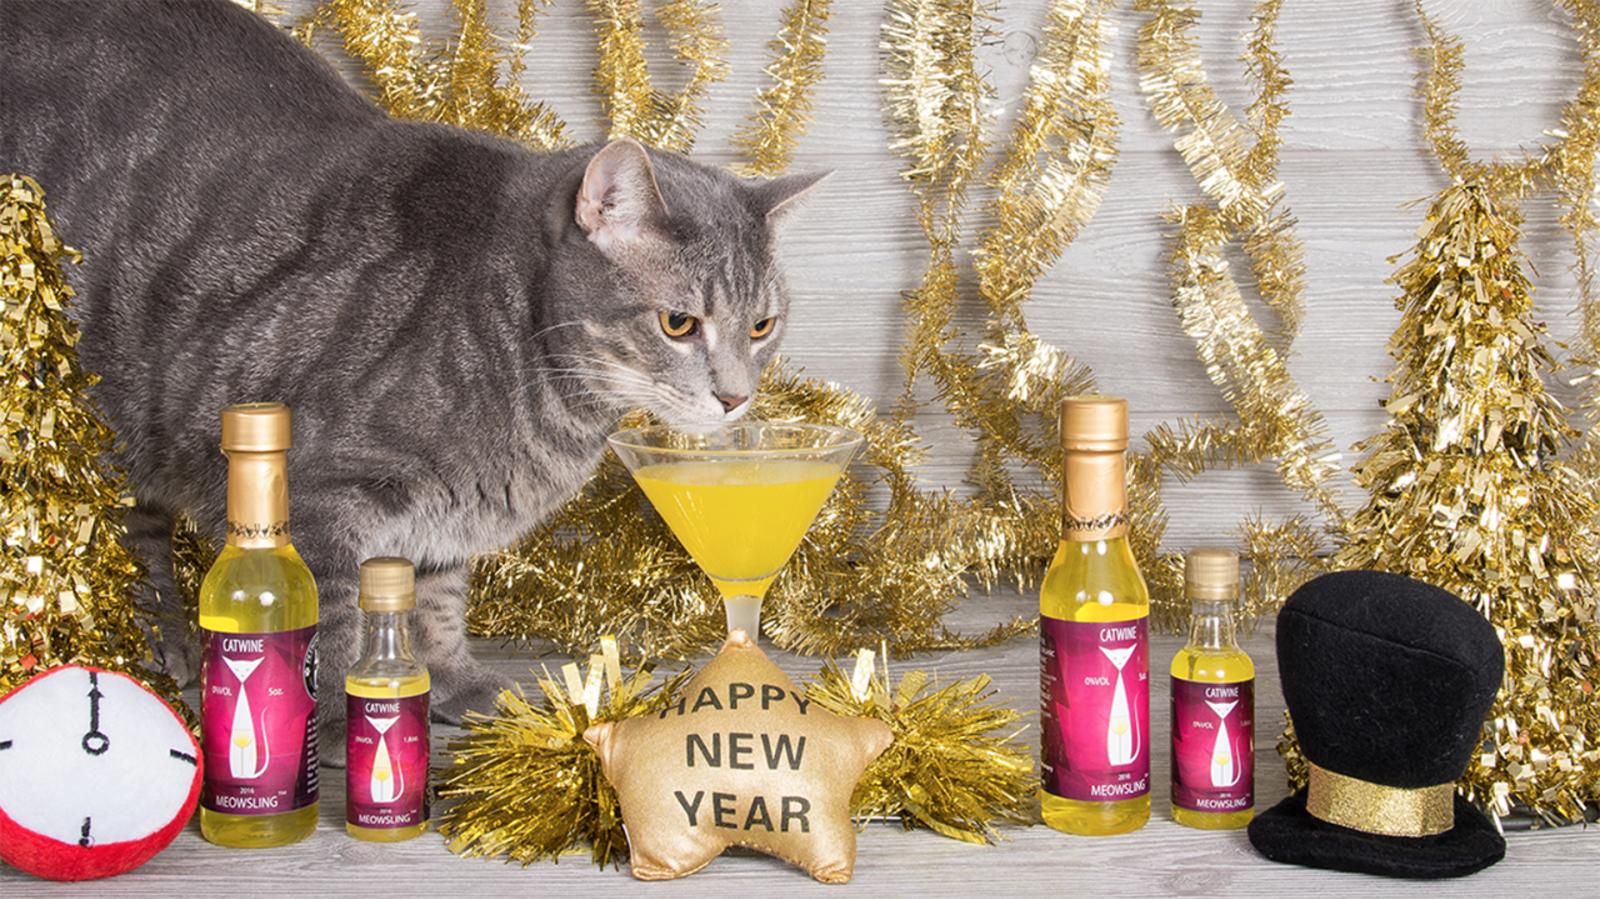 Even Your Pet Can Ring In The New Year With Winery S Wine